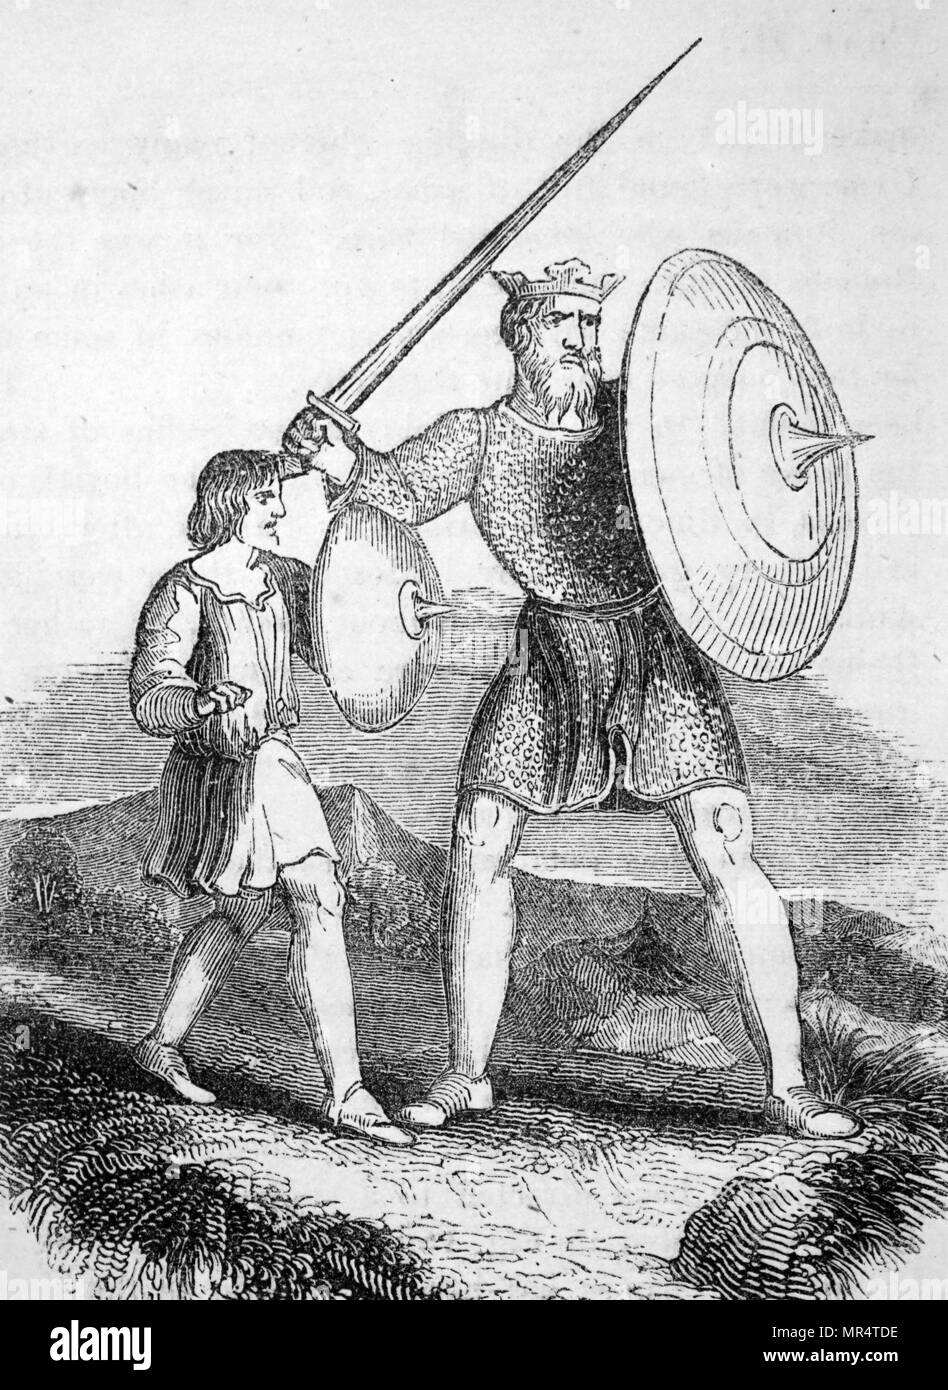 Illustration depicting an Anglo-Saxon King armed with a sword and spiked shield and clothed in chainmail. At his side is his armour bearer. Dated 18th century Stock Photo